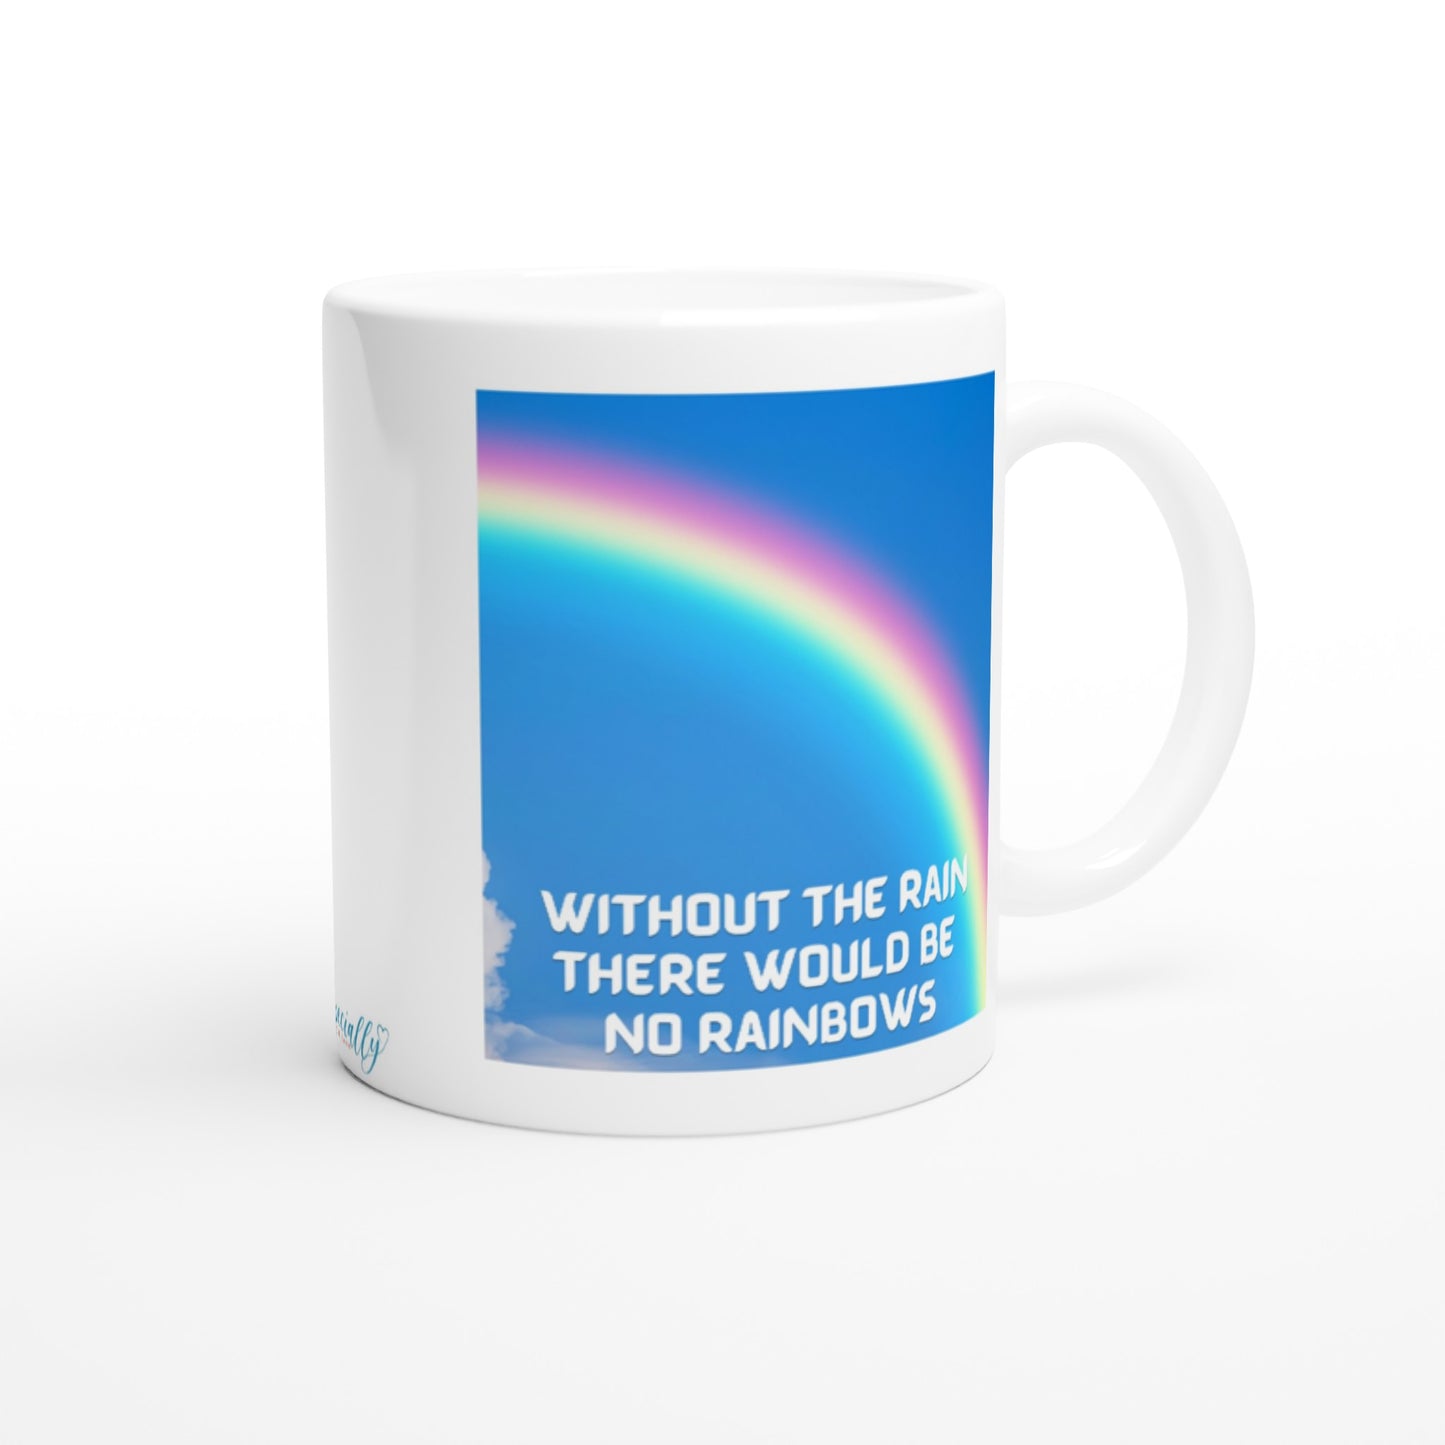 "Without the rain there would be no rainbows." 11 oz. Mug back view